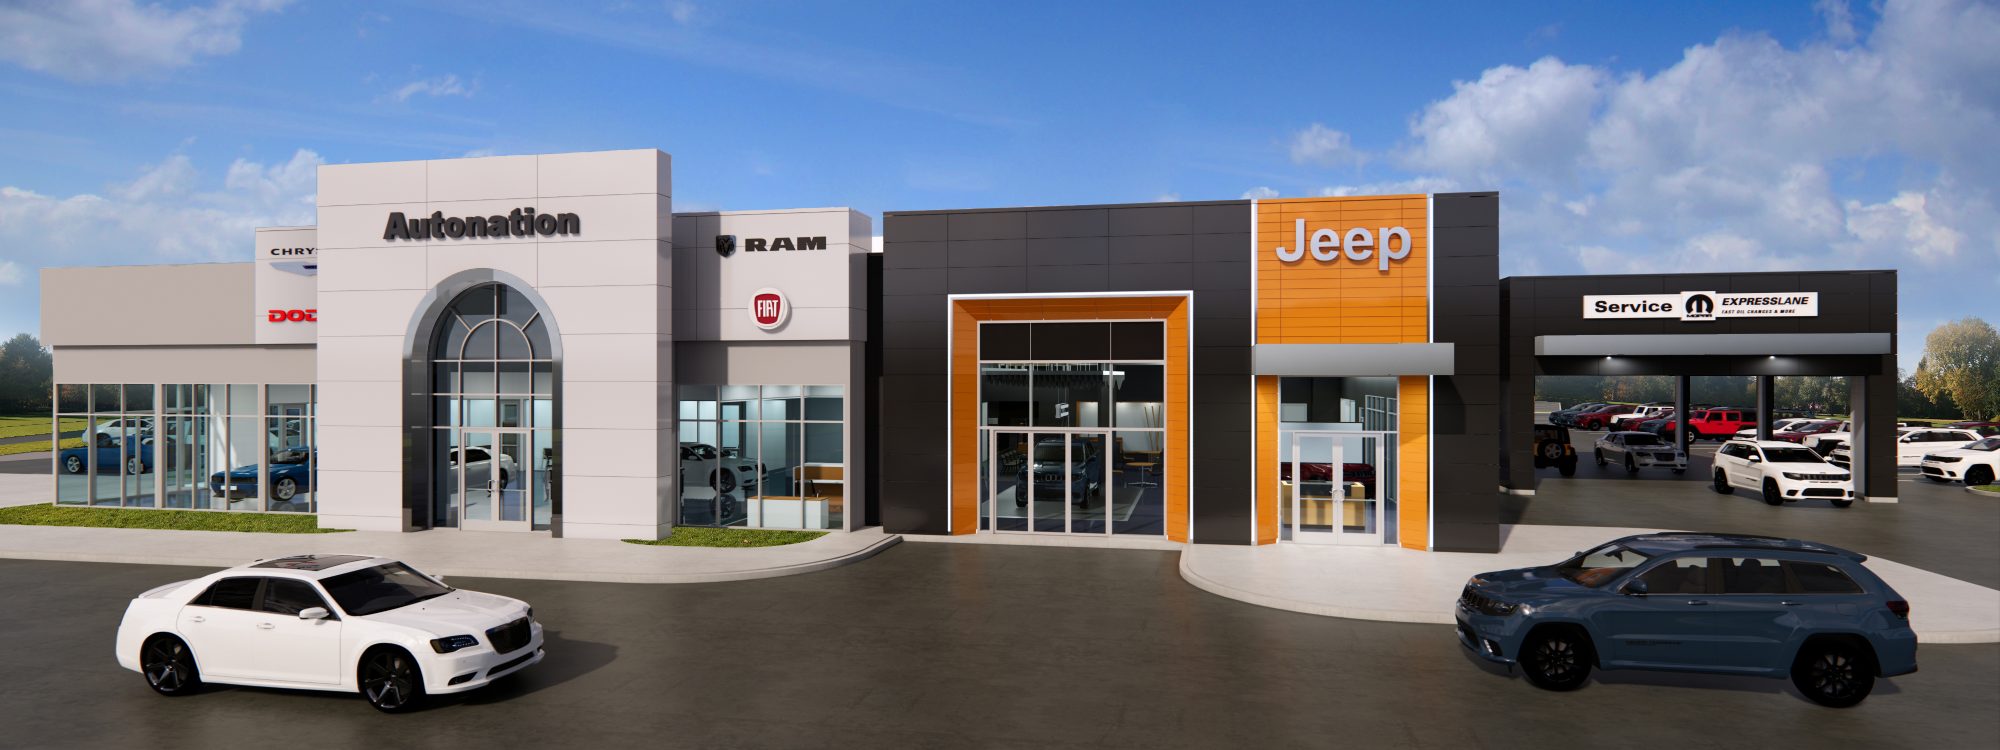 Exterior view of AutoNation Chrysler Dodge Jeep Ram & Fiat Columbus during the day. There is a clear blue sky, and a white truck parked in front of the building, which has white, grey, and red facings.